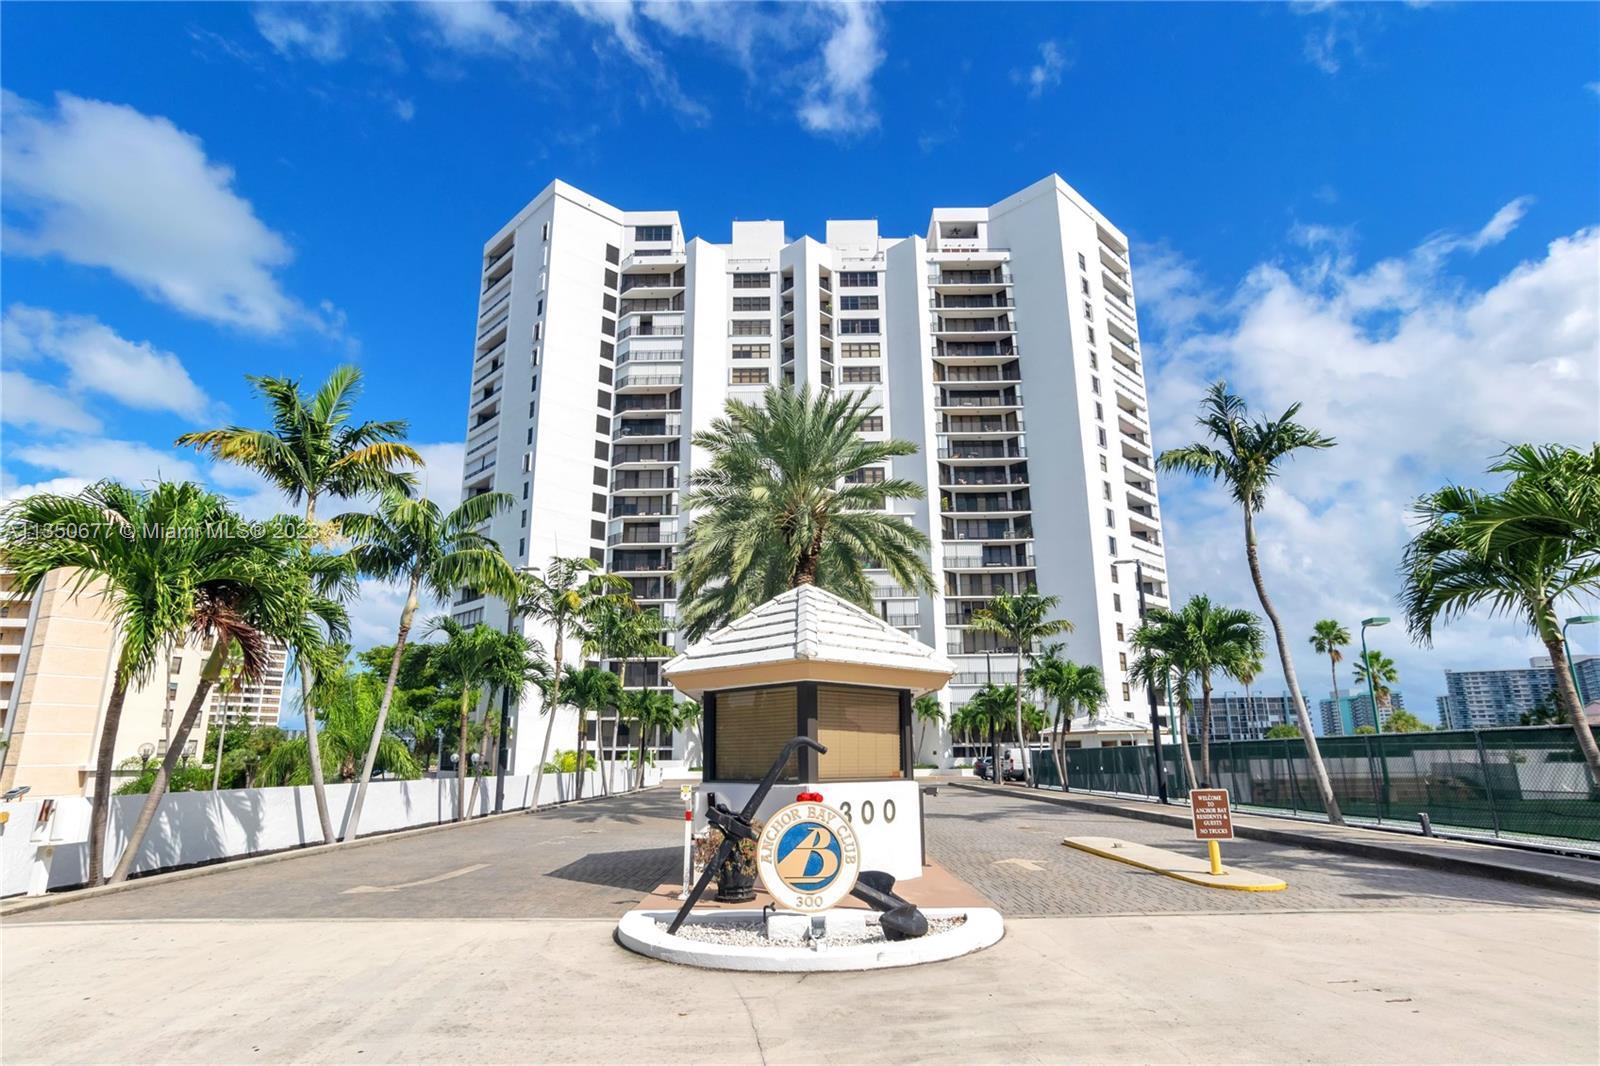 Welcome to your slice of paradise! This gorgeous 2 bed/2 bath apartment in Hallandale is located off